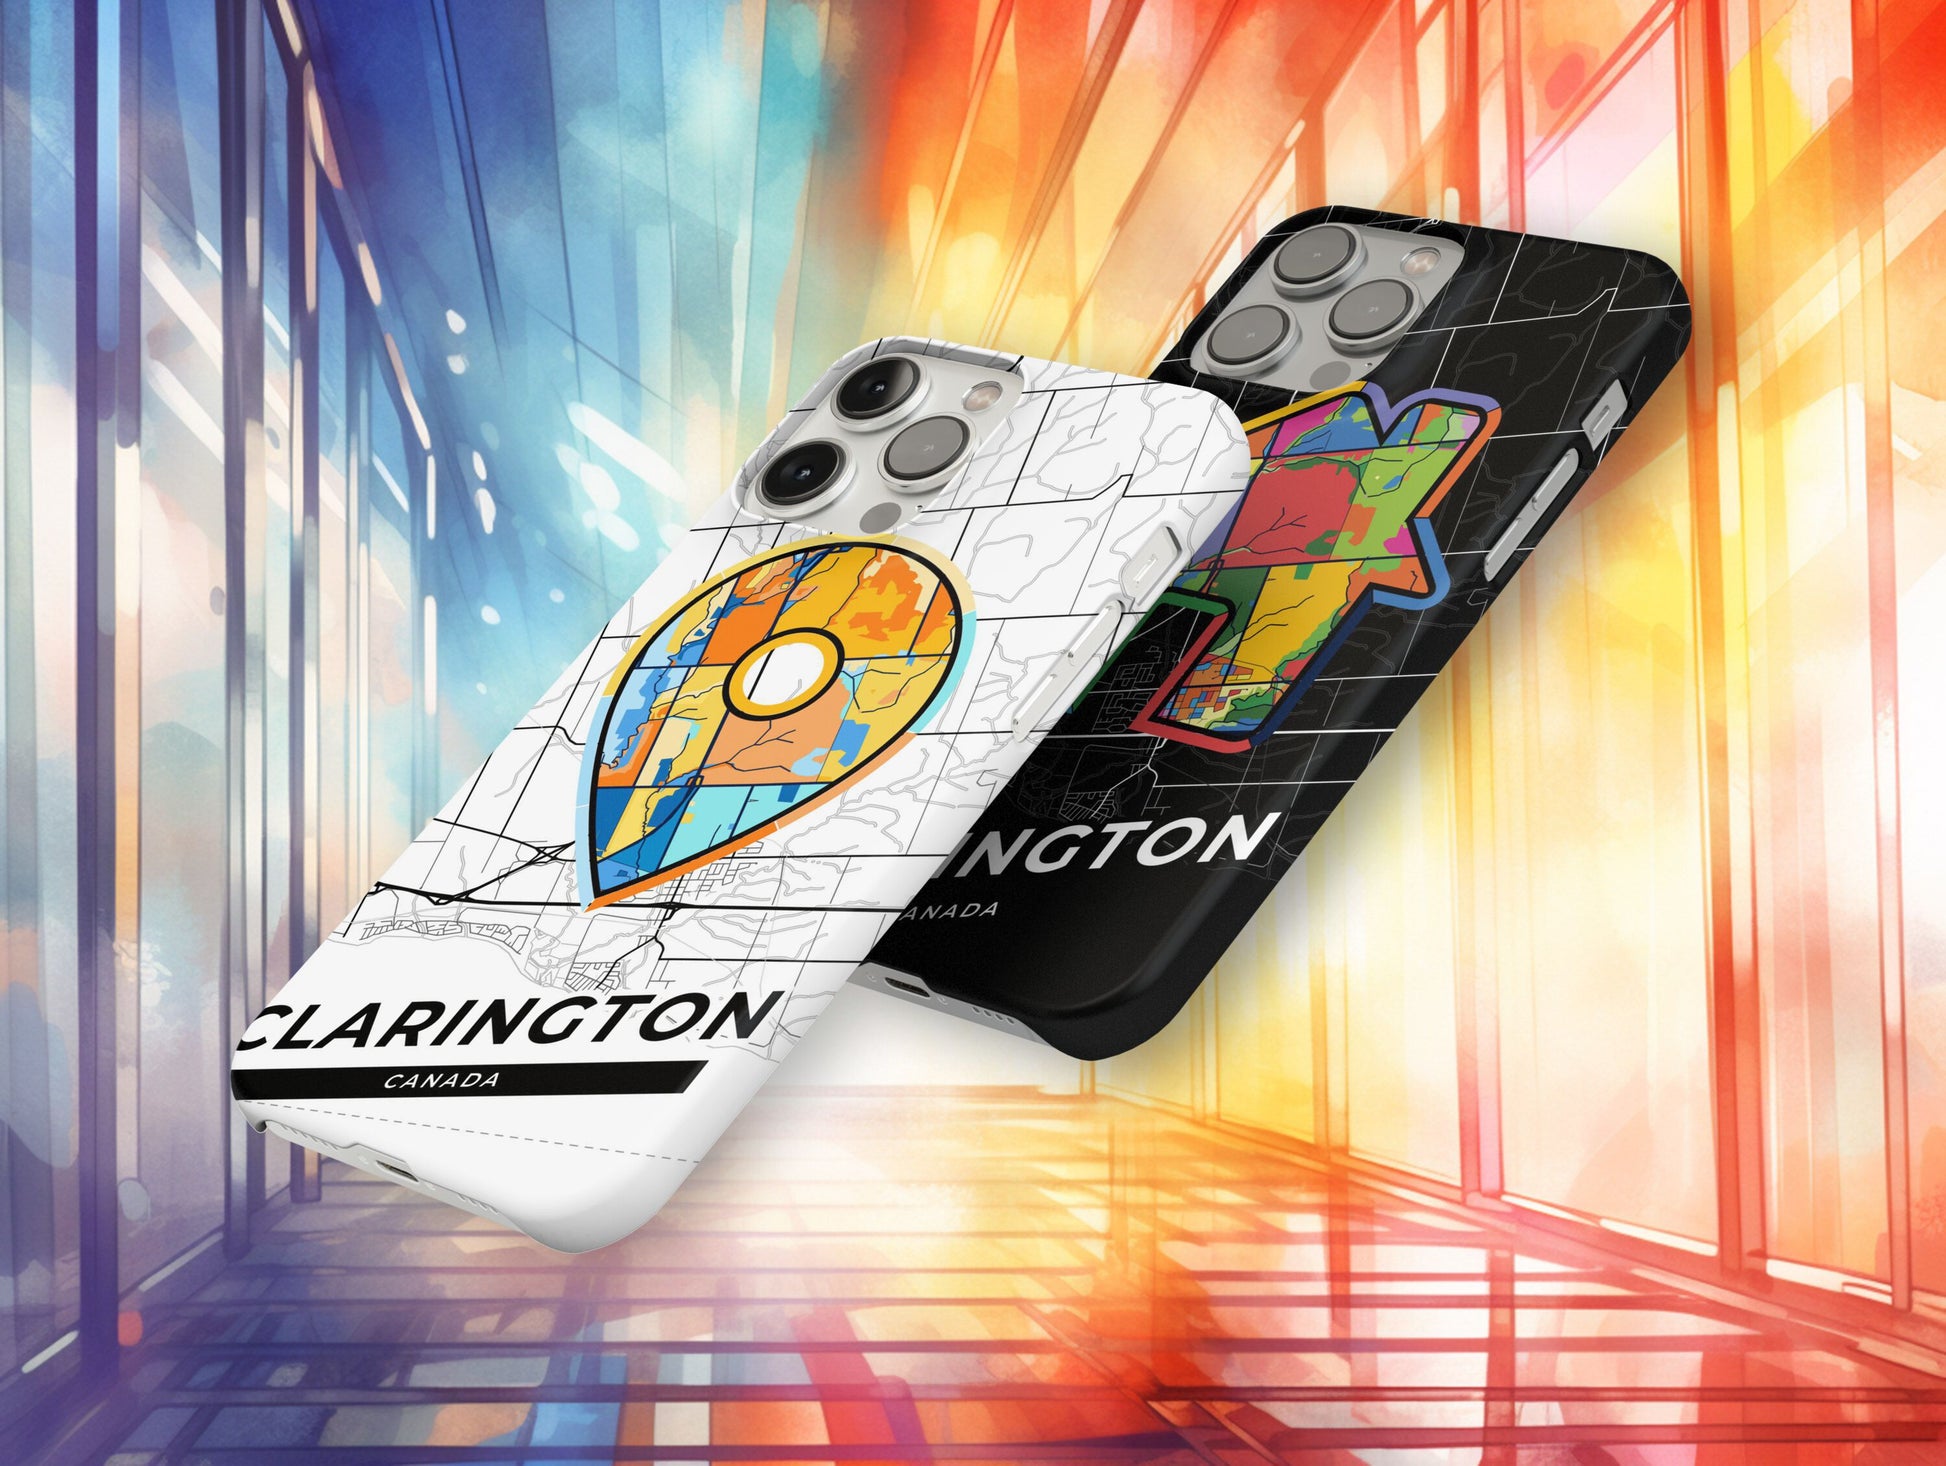 Clarington Canada slim phone case with colorful icon. Birthday, wedding or housewarming gift. Couple match cases.